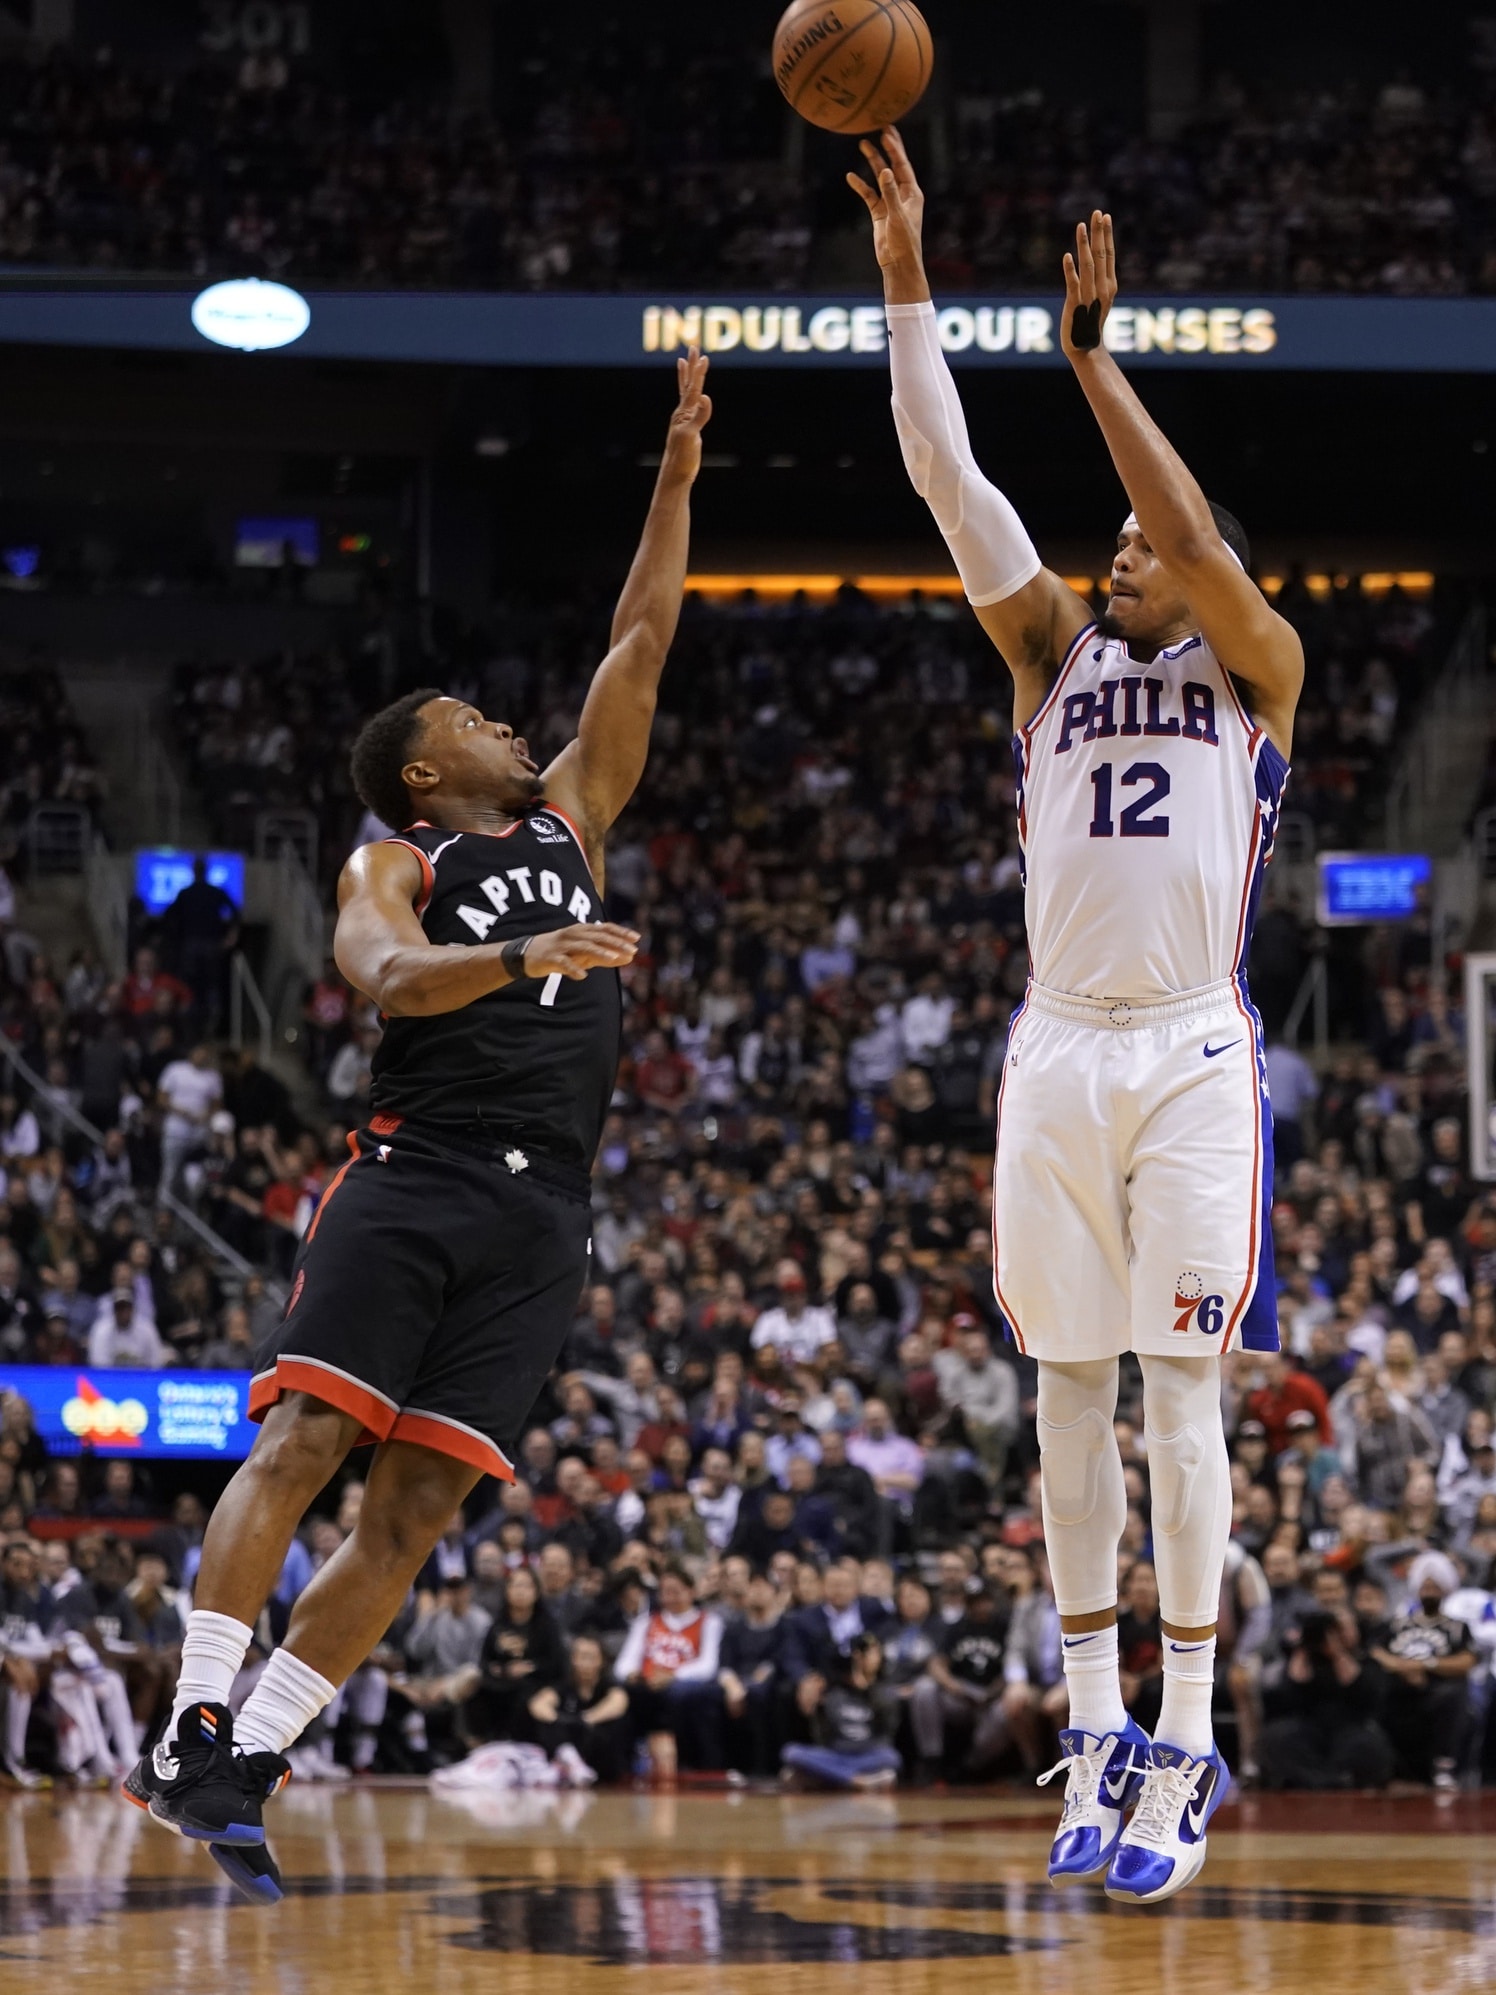 How Many Three-Pointers is Too Many? – Observations from Raptors 107, Sixers 95